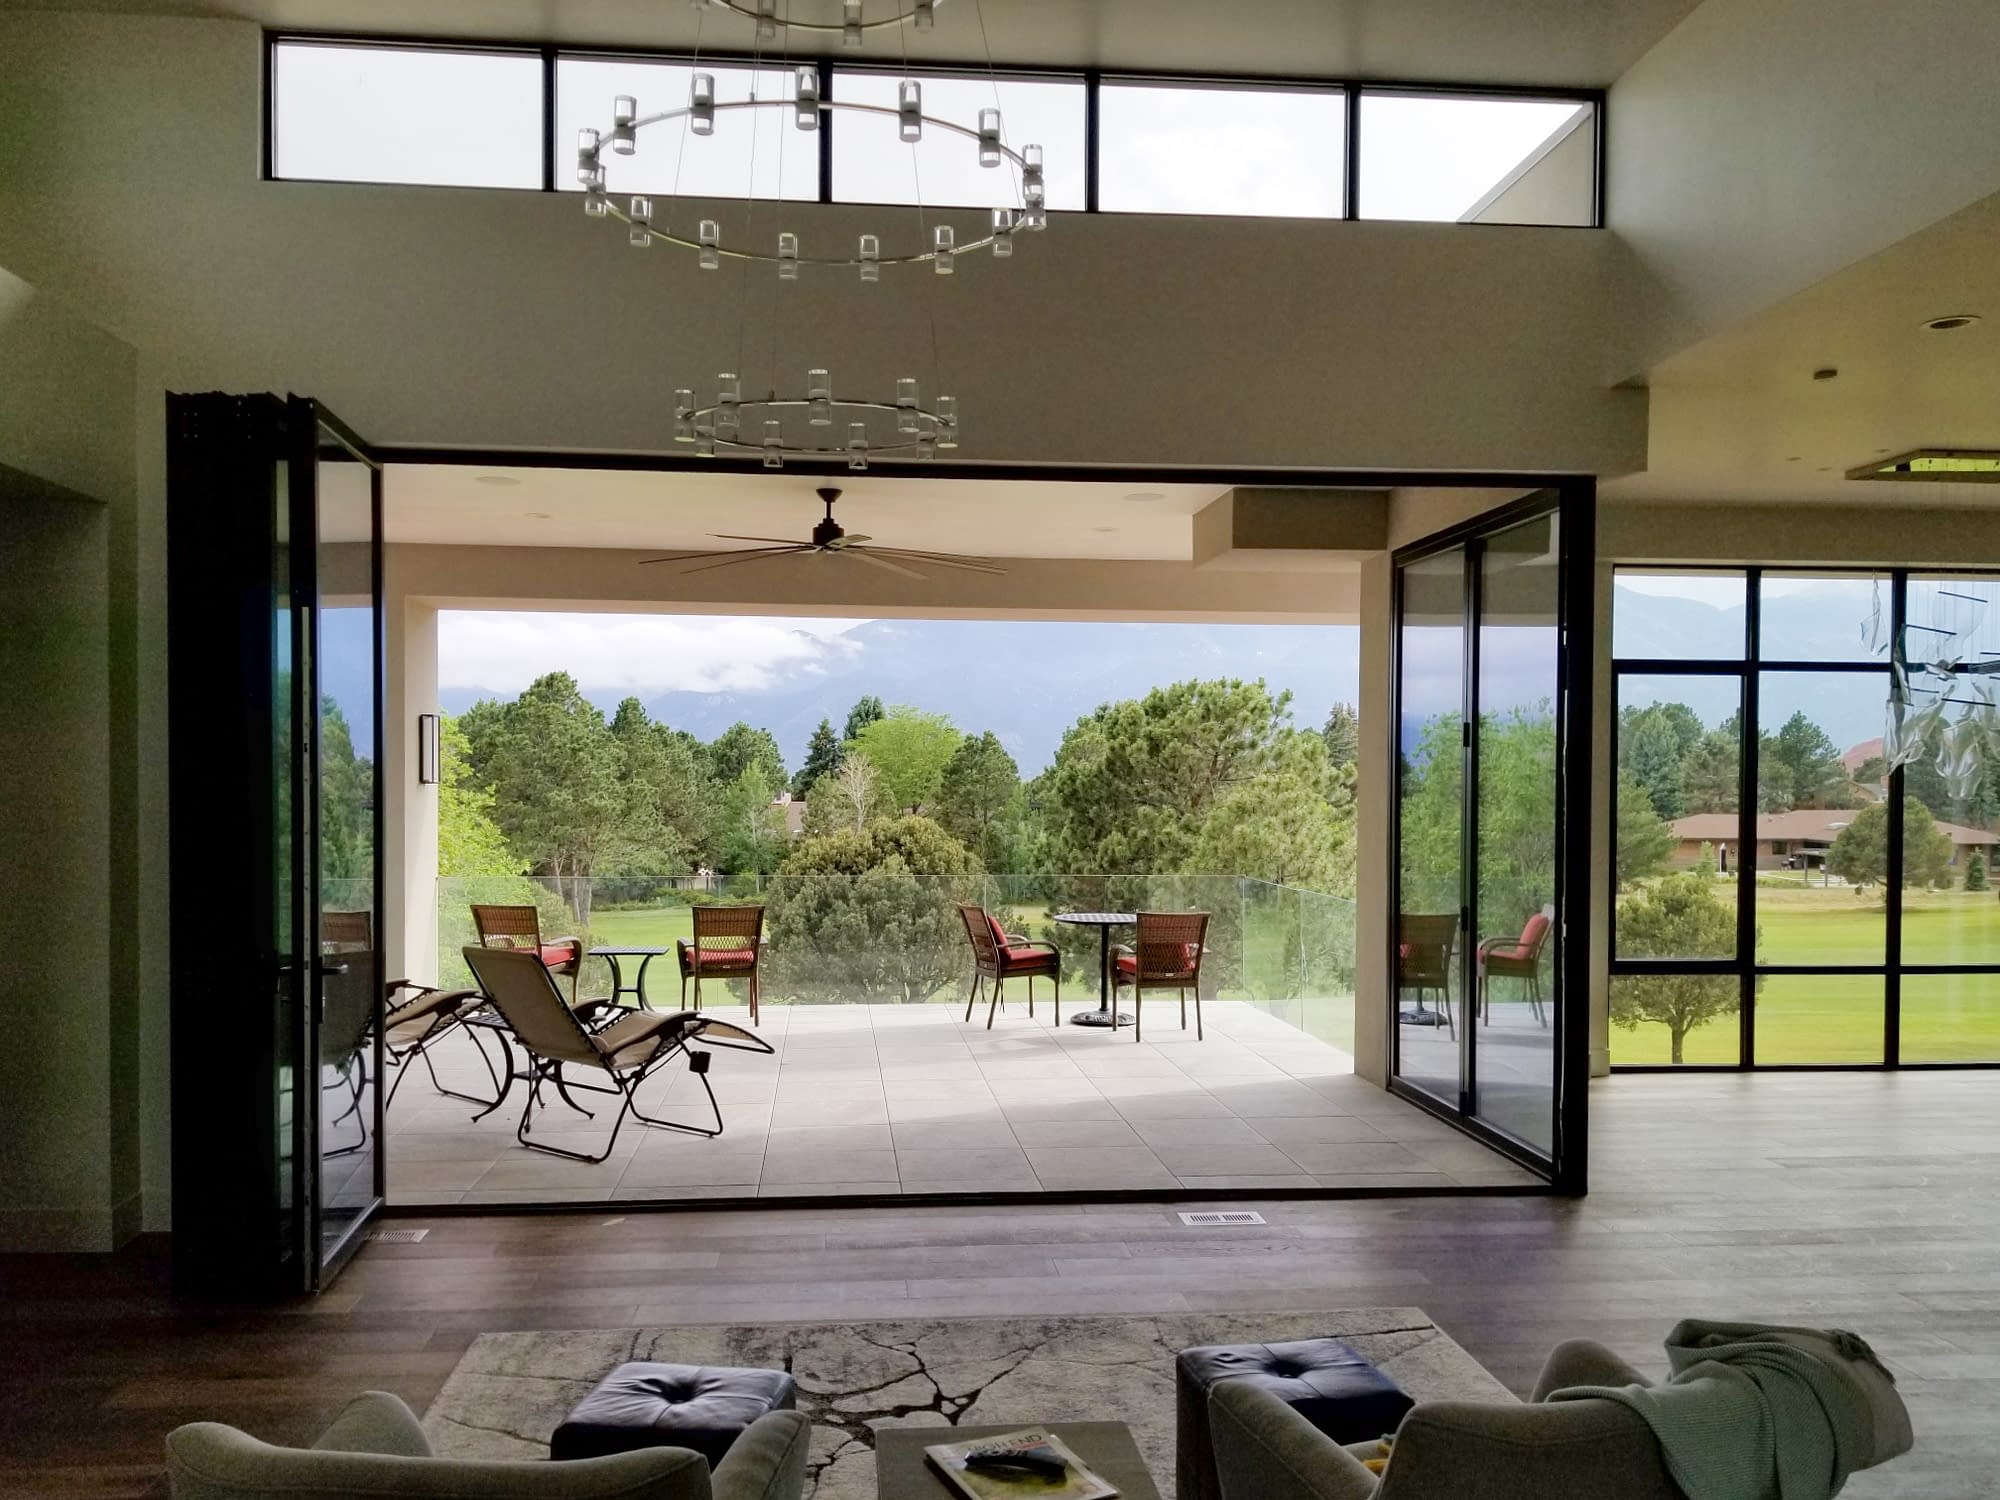 The 5 panels of this aluminum folding door fully opens to the outdoor living space.